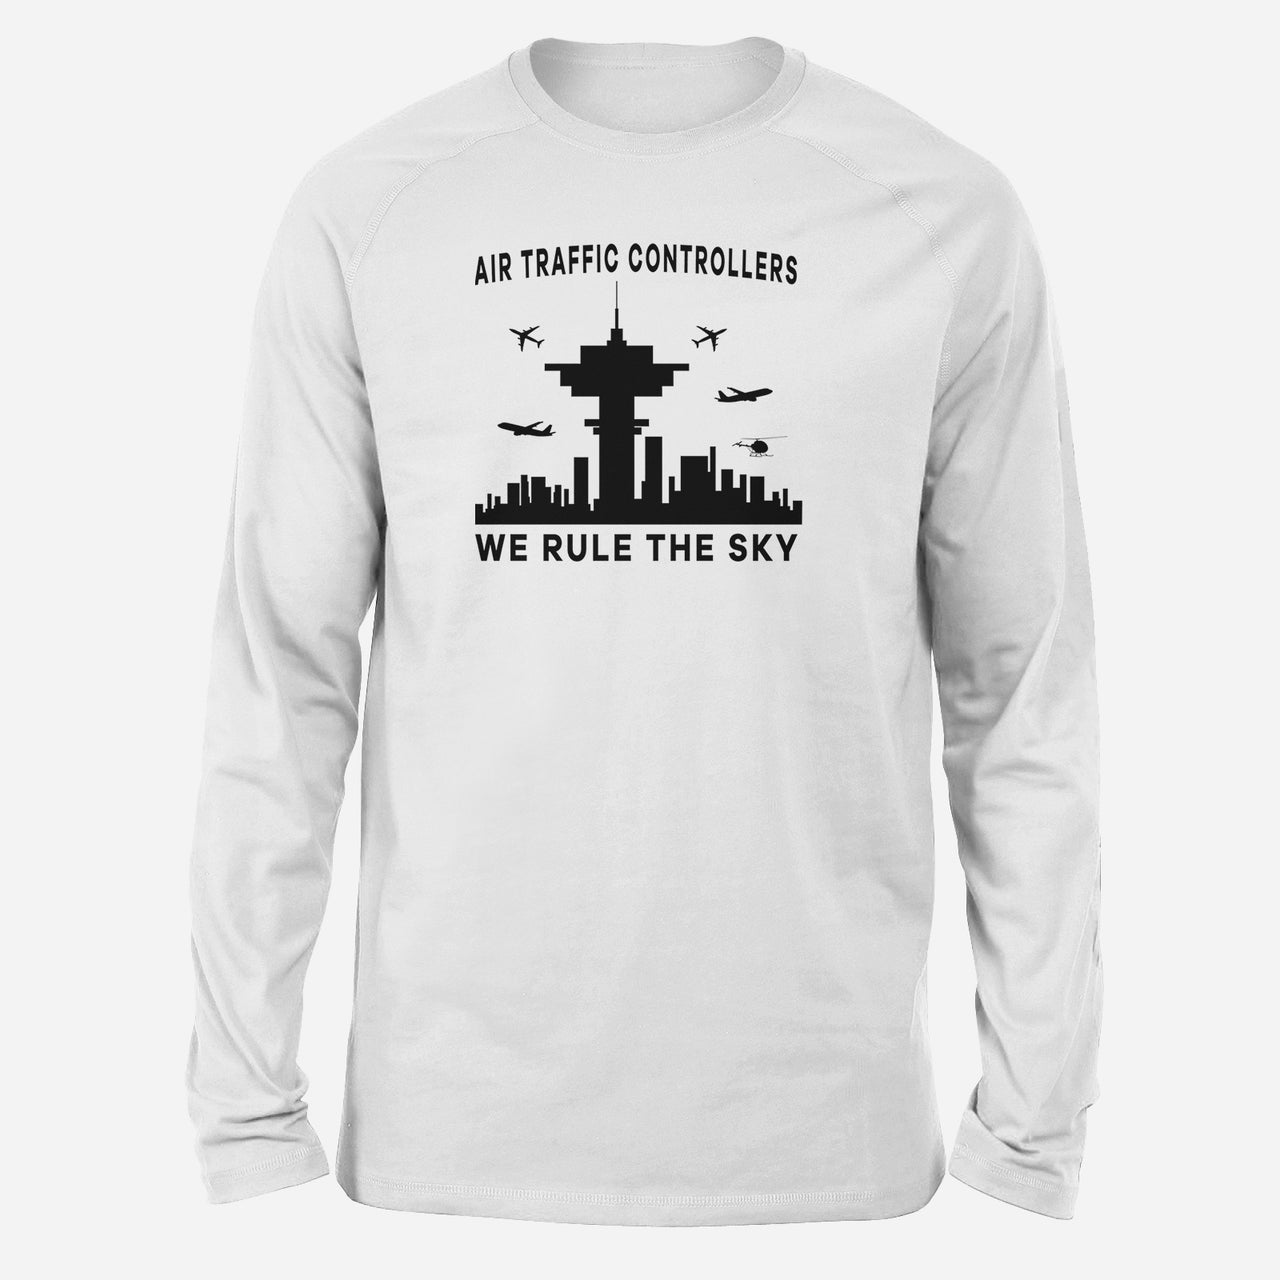 Air Traffic Controllers - We Rule The Sky Designed Long-Sleeve T-Shirts